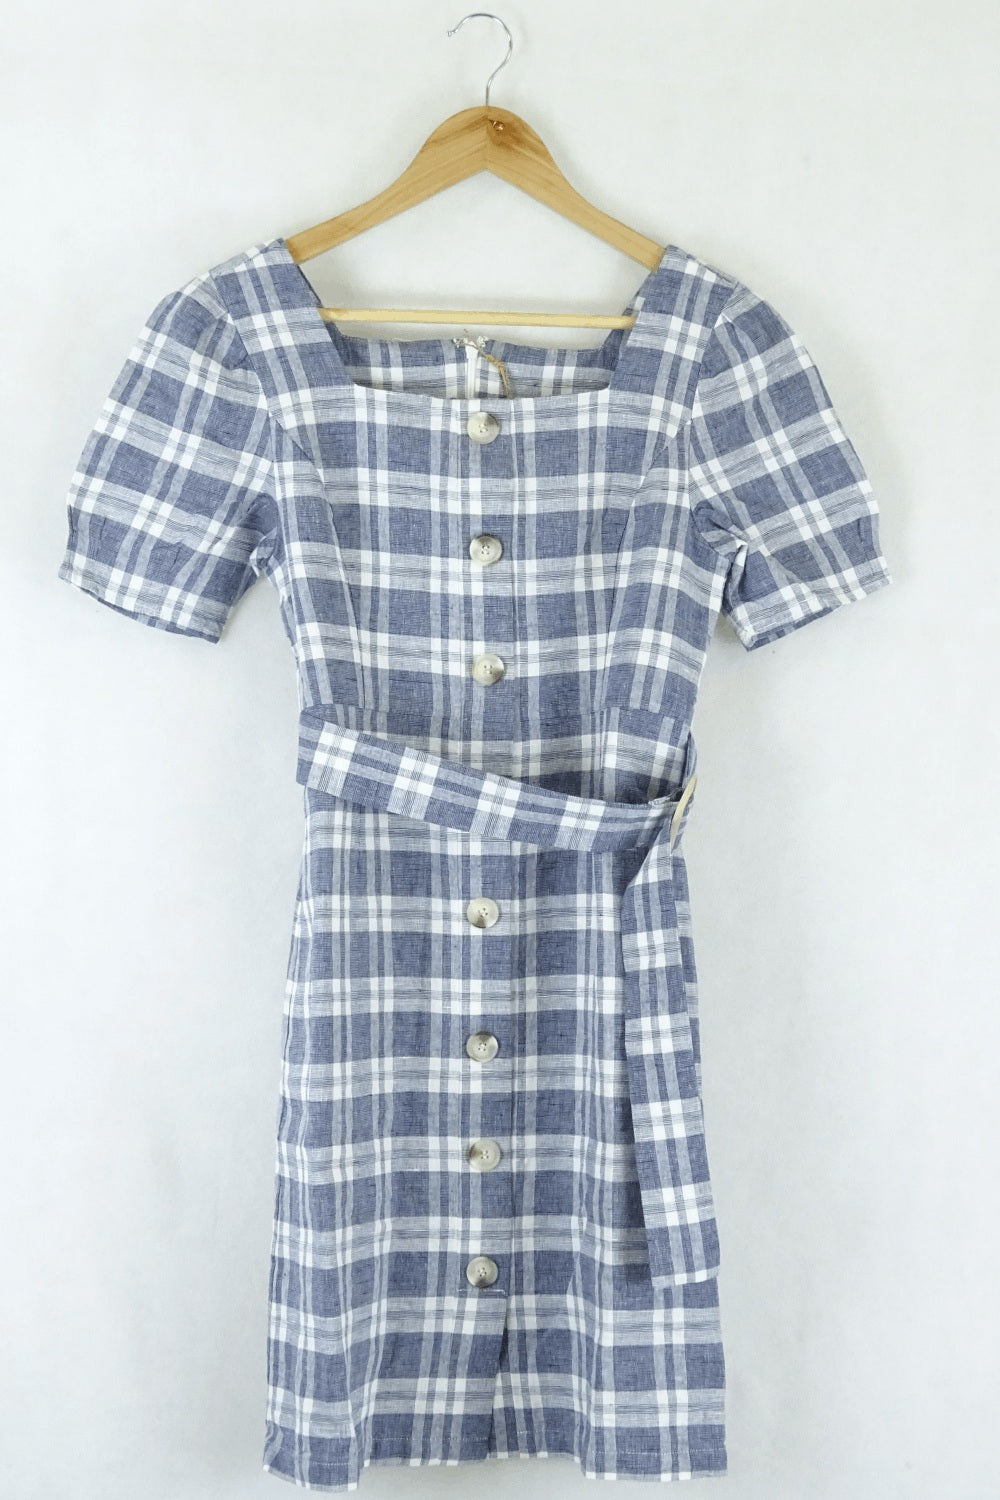 One More Vintage Style Navy Checked Dress - M